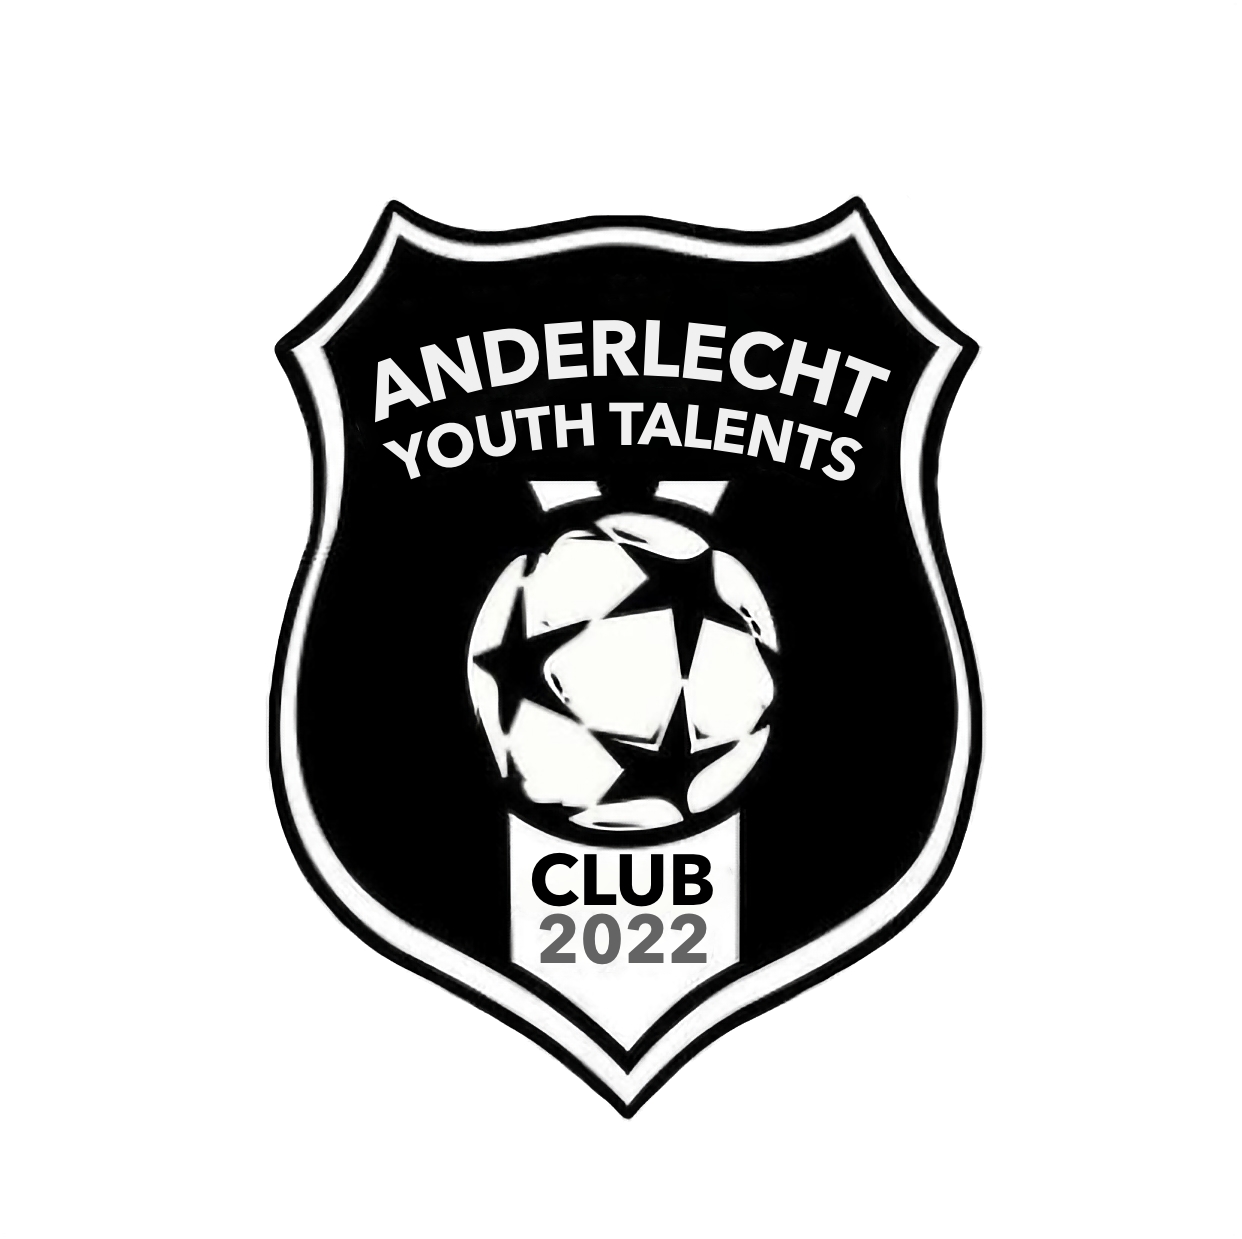 3 - Anderlecht Youth Talents